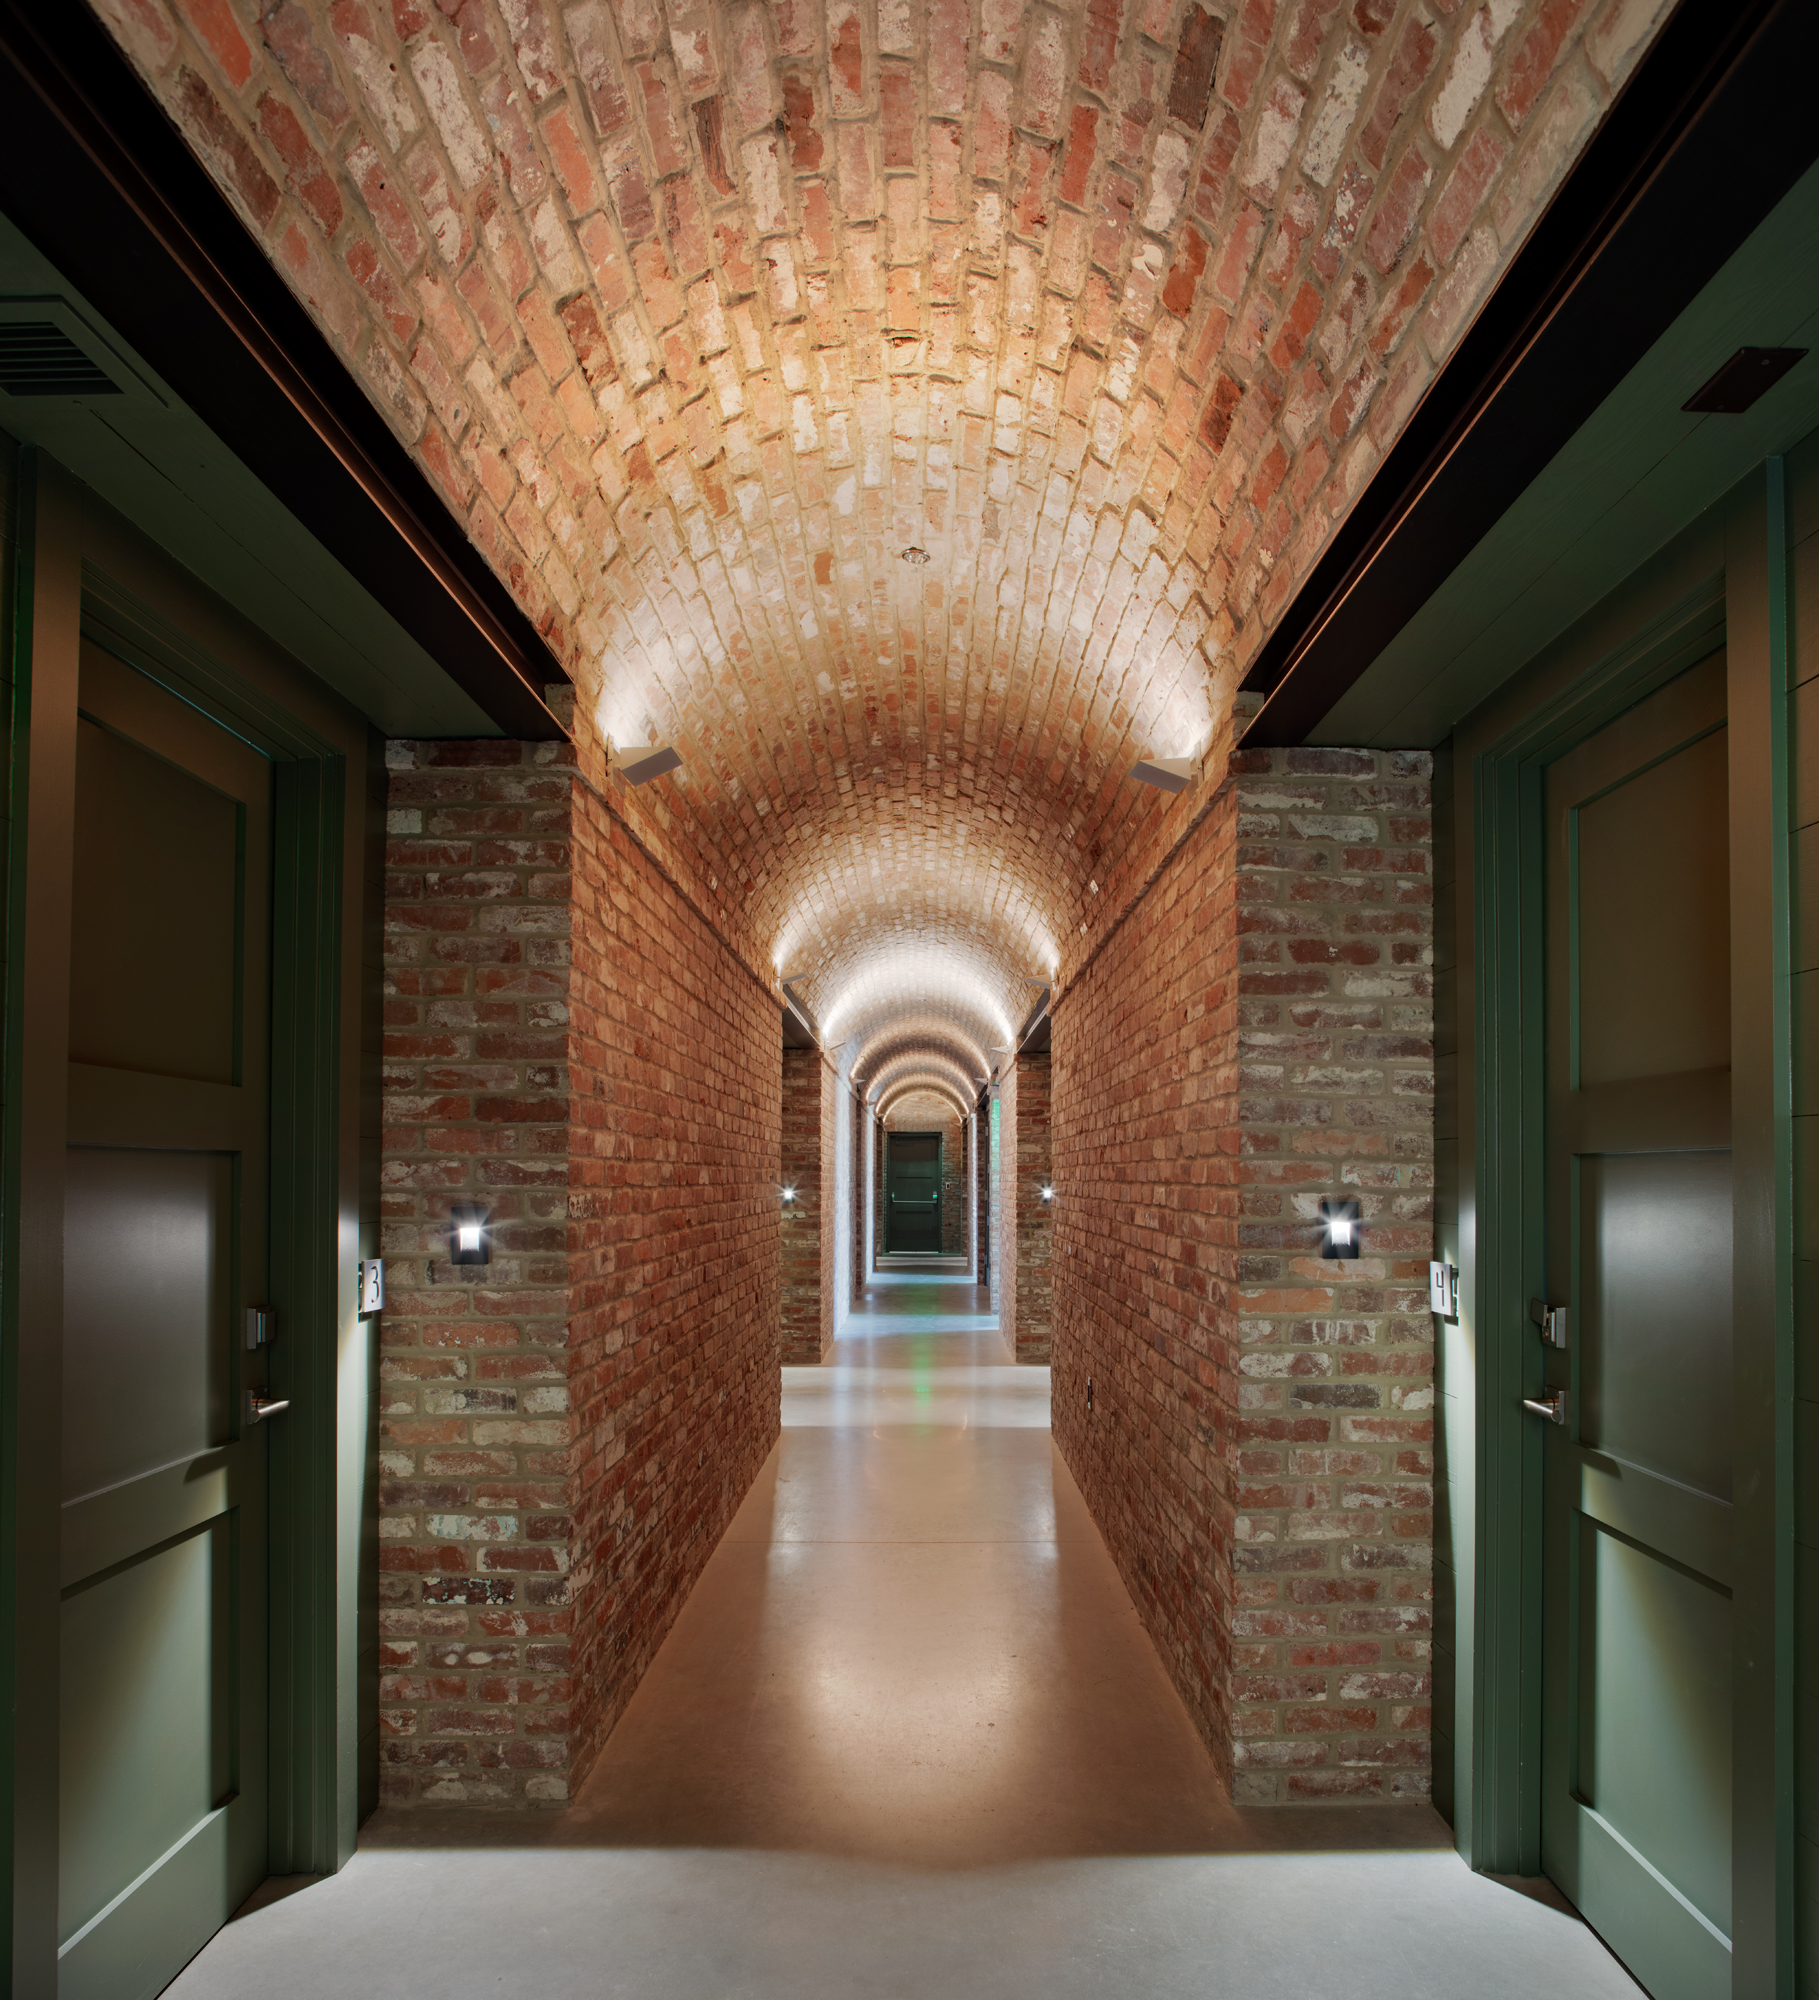 The burrow at the Ohoopee Match Club features a brick vaulted hallway with guest rooms